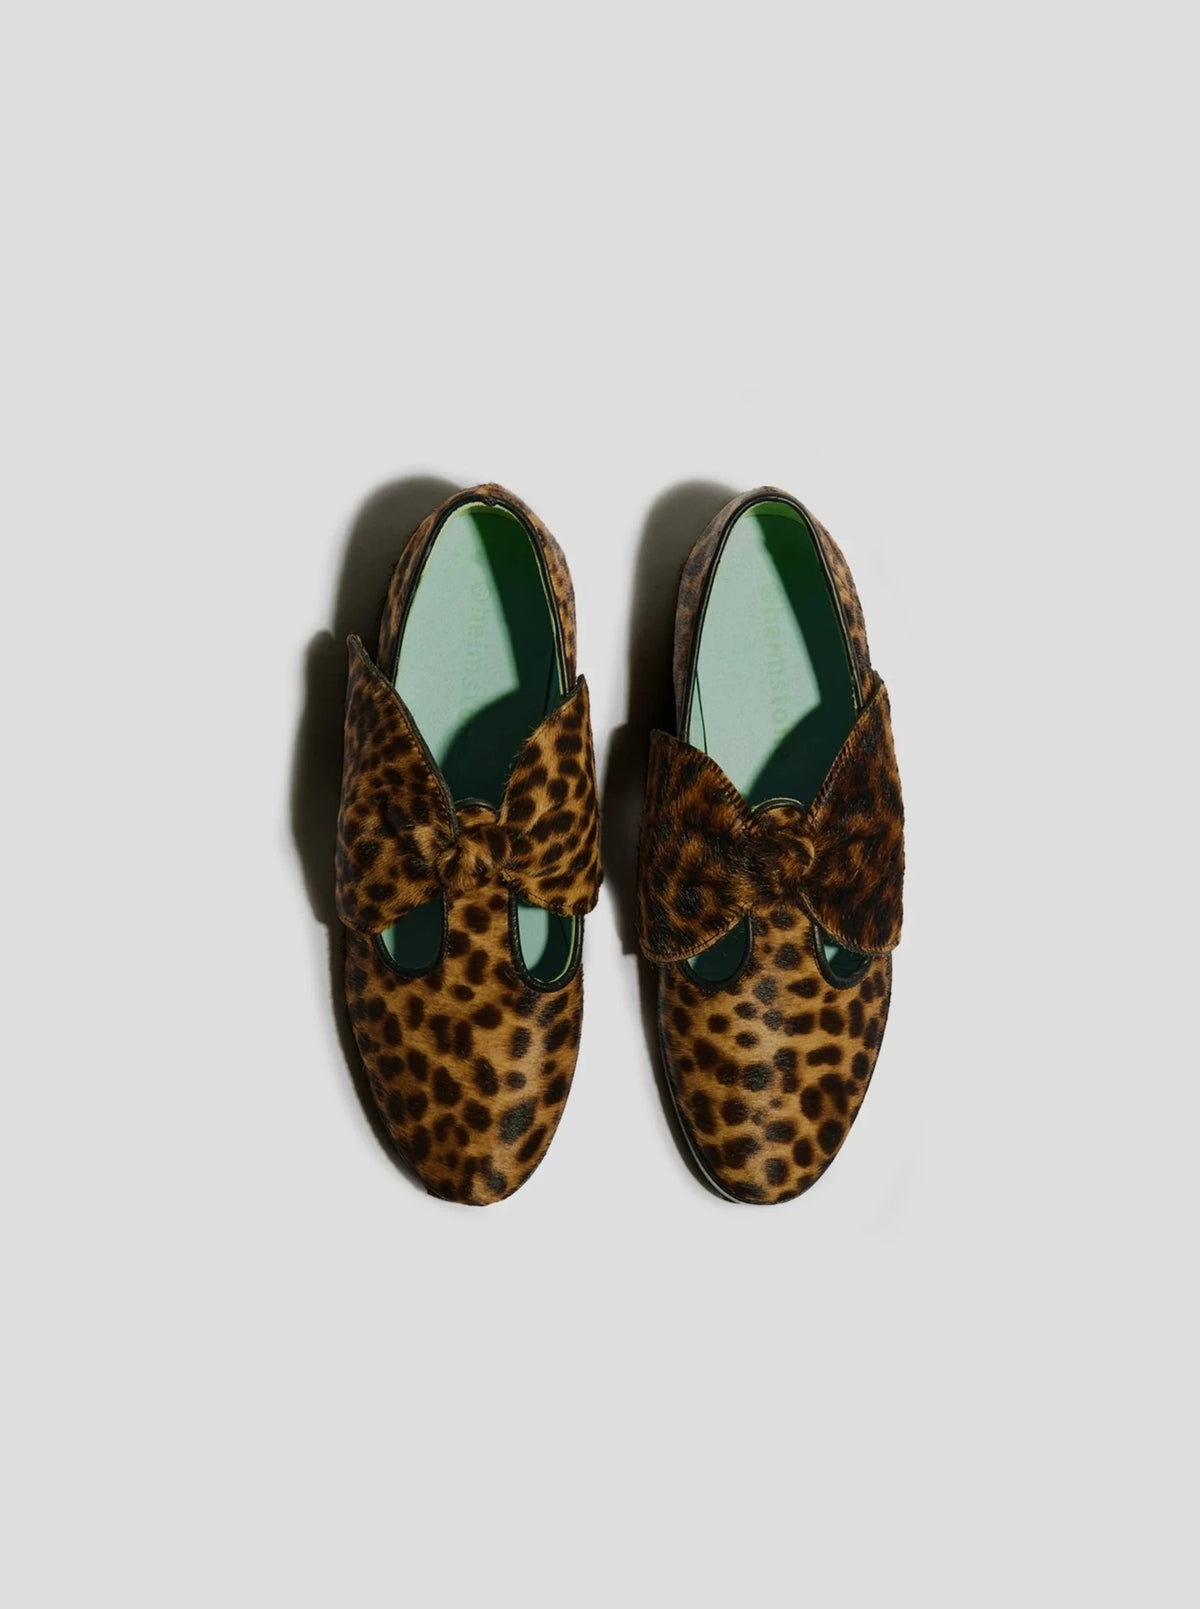 BB Ballerina Shoes in Leopard Printed Leather